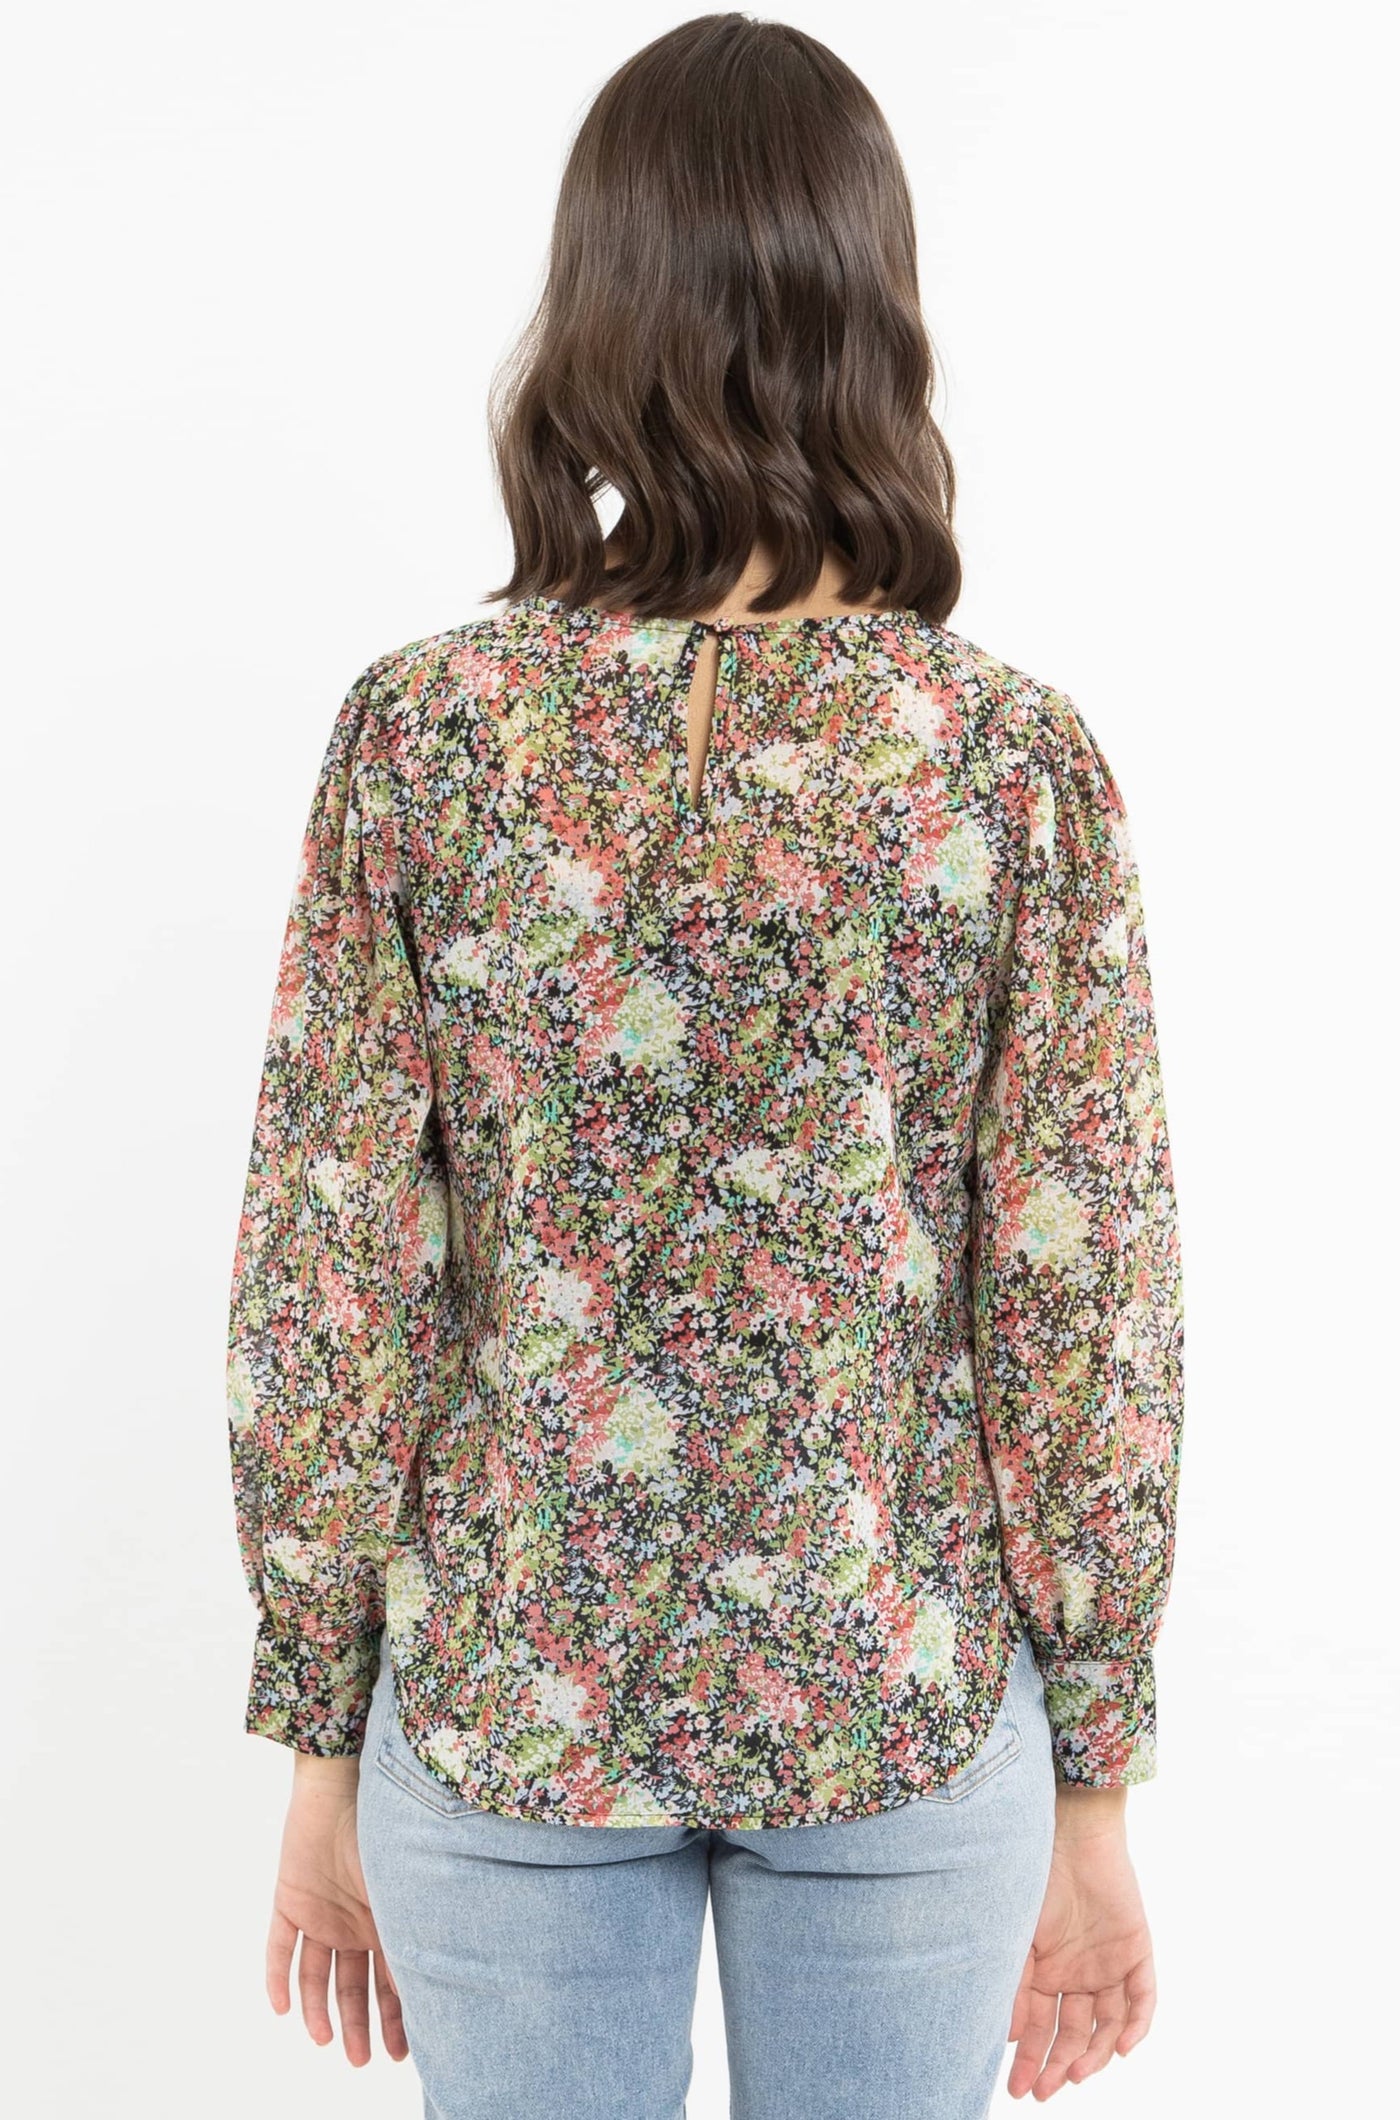 LEILA + Luca Forever Top - Multi Floral  The Leila + Luca Forever Top is a gorgeous feminine long sleeve which can easily be dressed up or down.  It features elasticated ruched sleeve cuffs, each sporting a single ruffle, finished with a gently curved hemline dropping slightly lower at the back and keyhole closure.      Sizes; 8, 10, 12, 14     Elasticated ruched sleeve cuffs     Curved hemline     100% Polyester